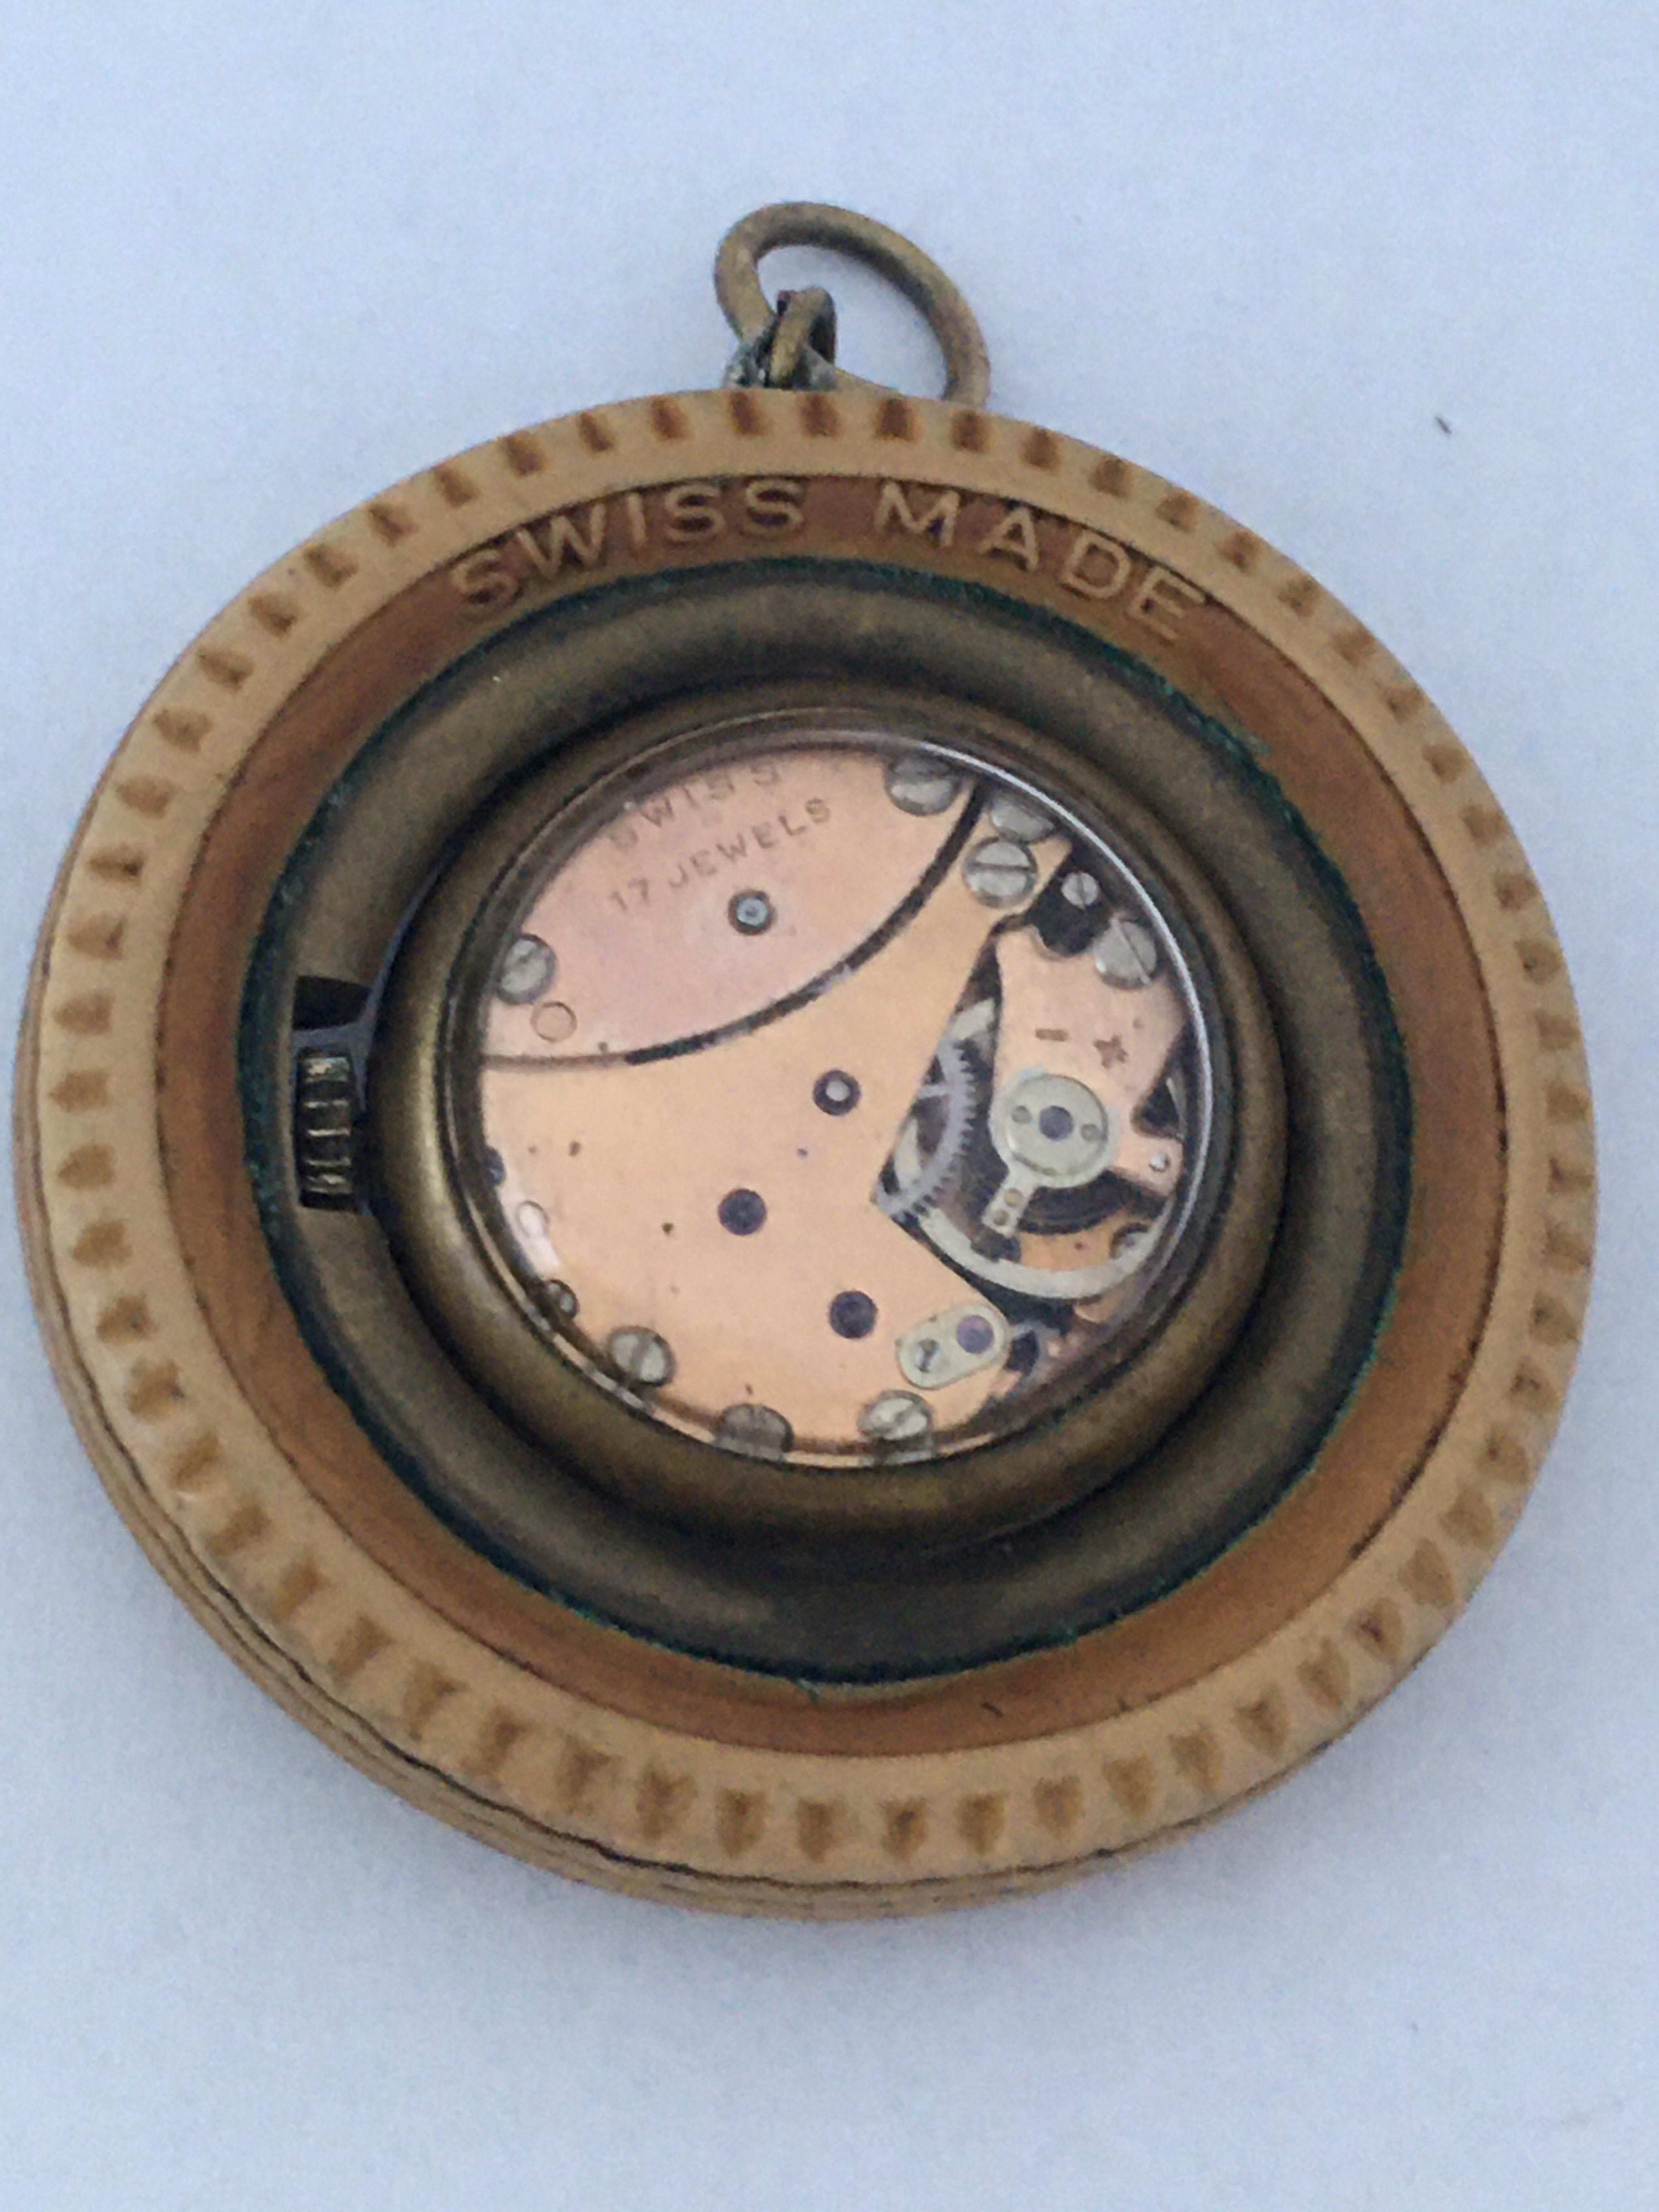 This beautiful vintage hand winding pendant watch is in good working condition and it is running. Visible signs of ageing and wear as shown. 

Please study the images carefully as form part of the description.